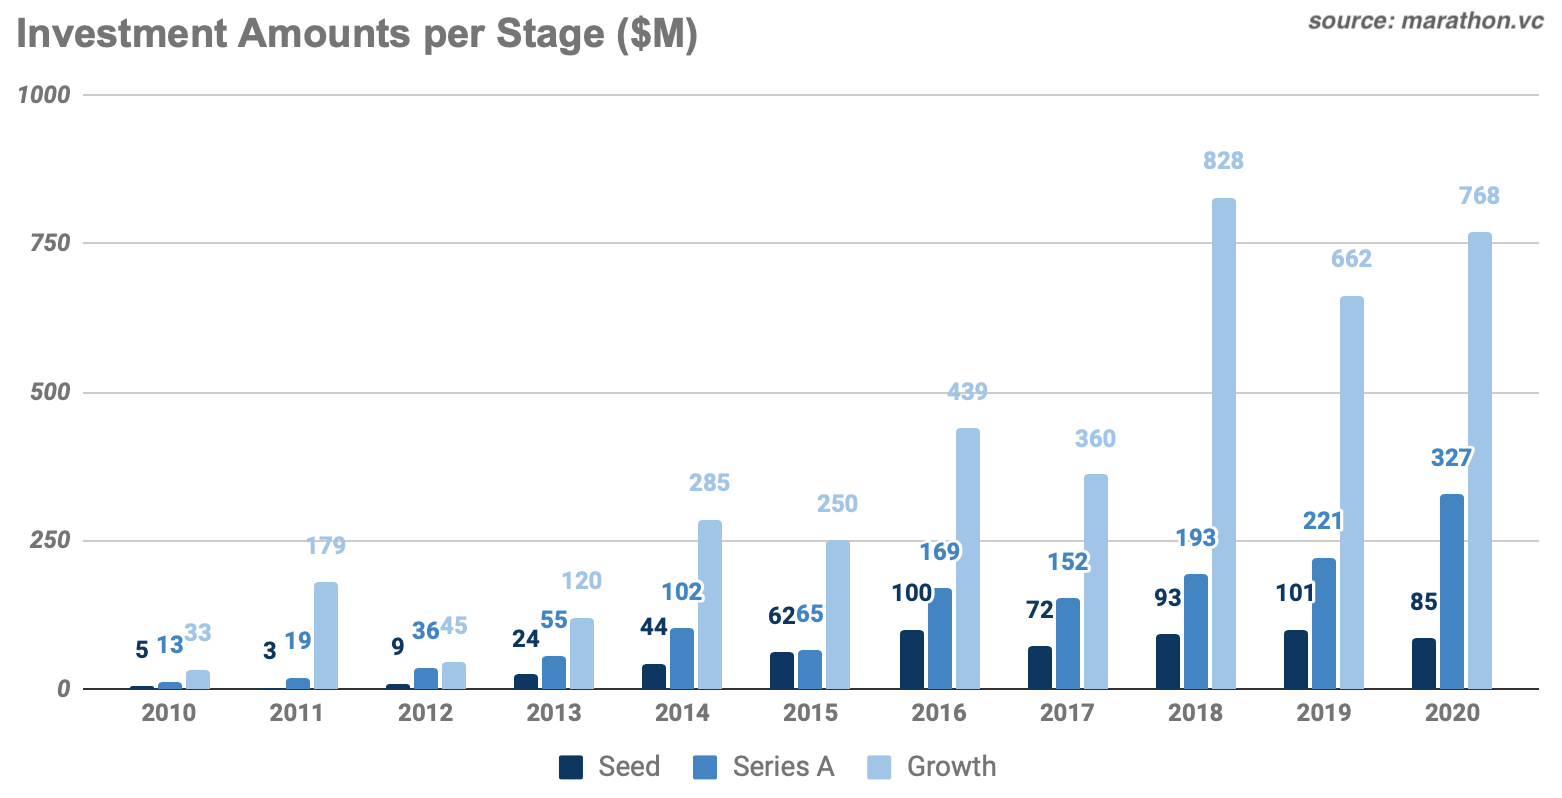 Investment amounts per stage